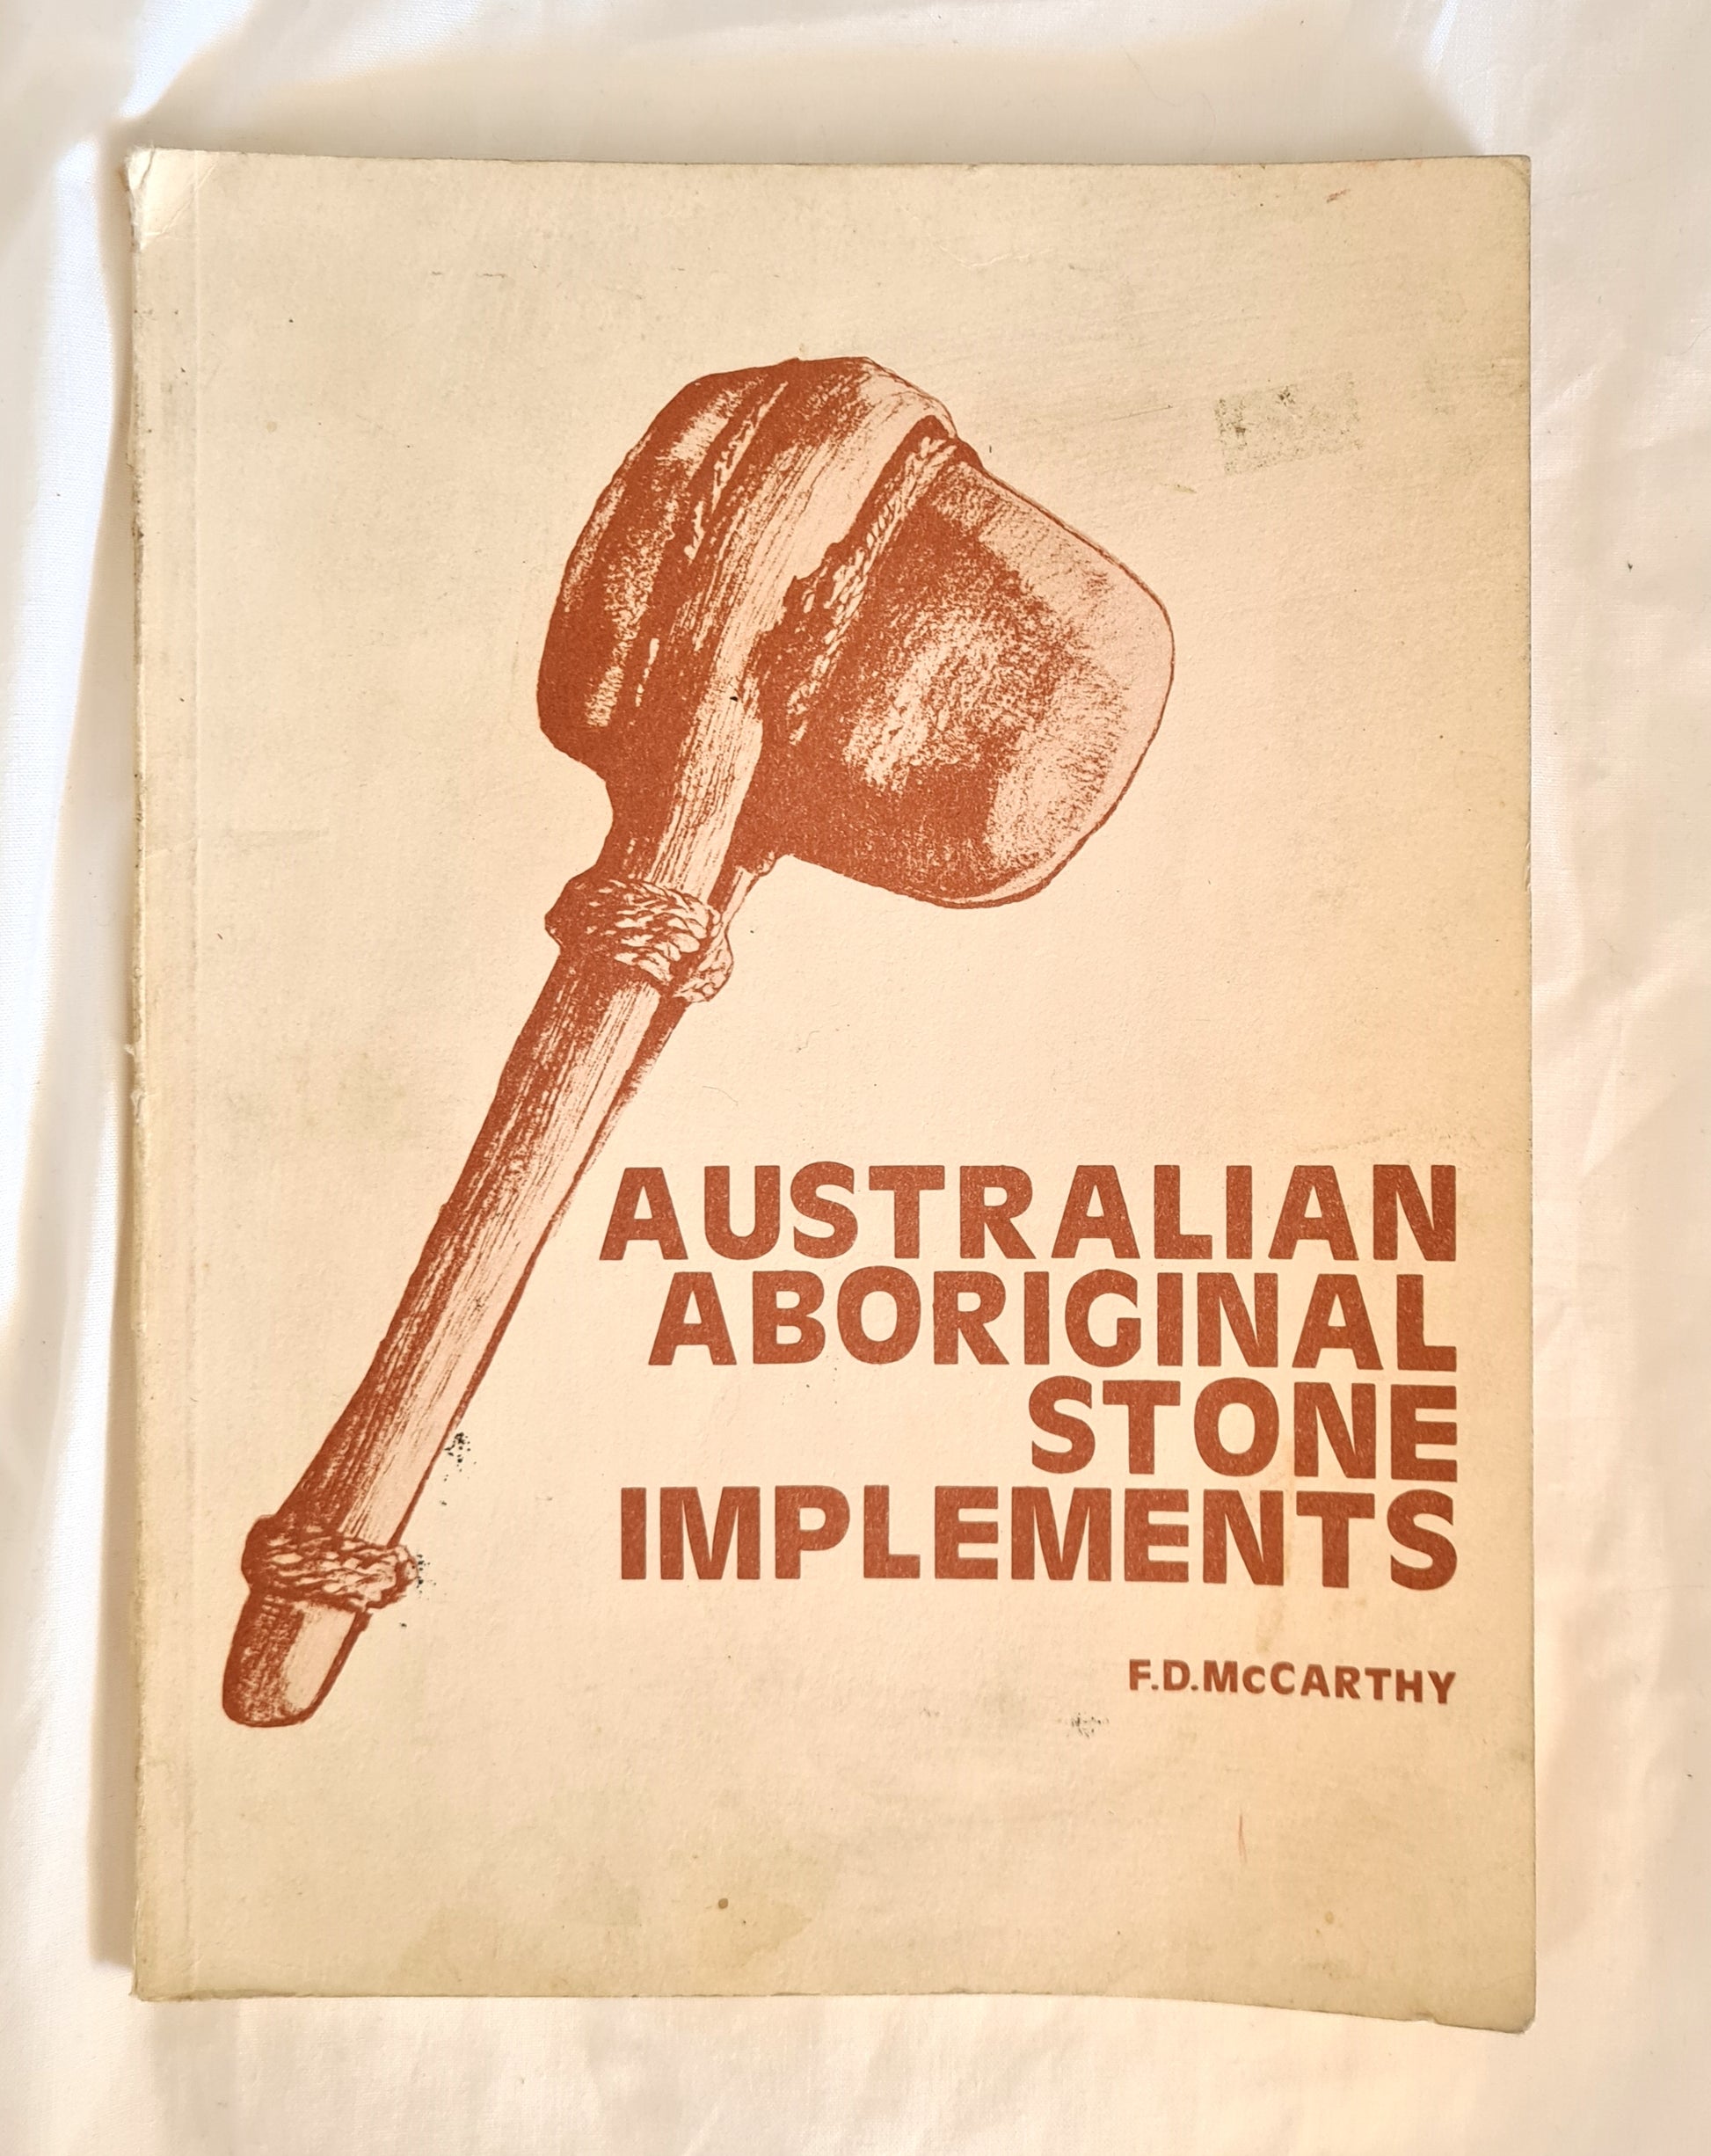 Australian Aboriginal Stone Implements  Including Bone, Shell and Tooth Implements  by Frederick D. McCarthy